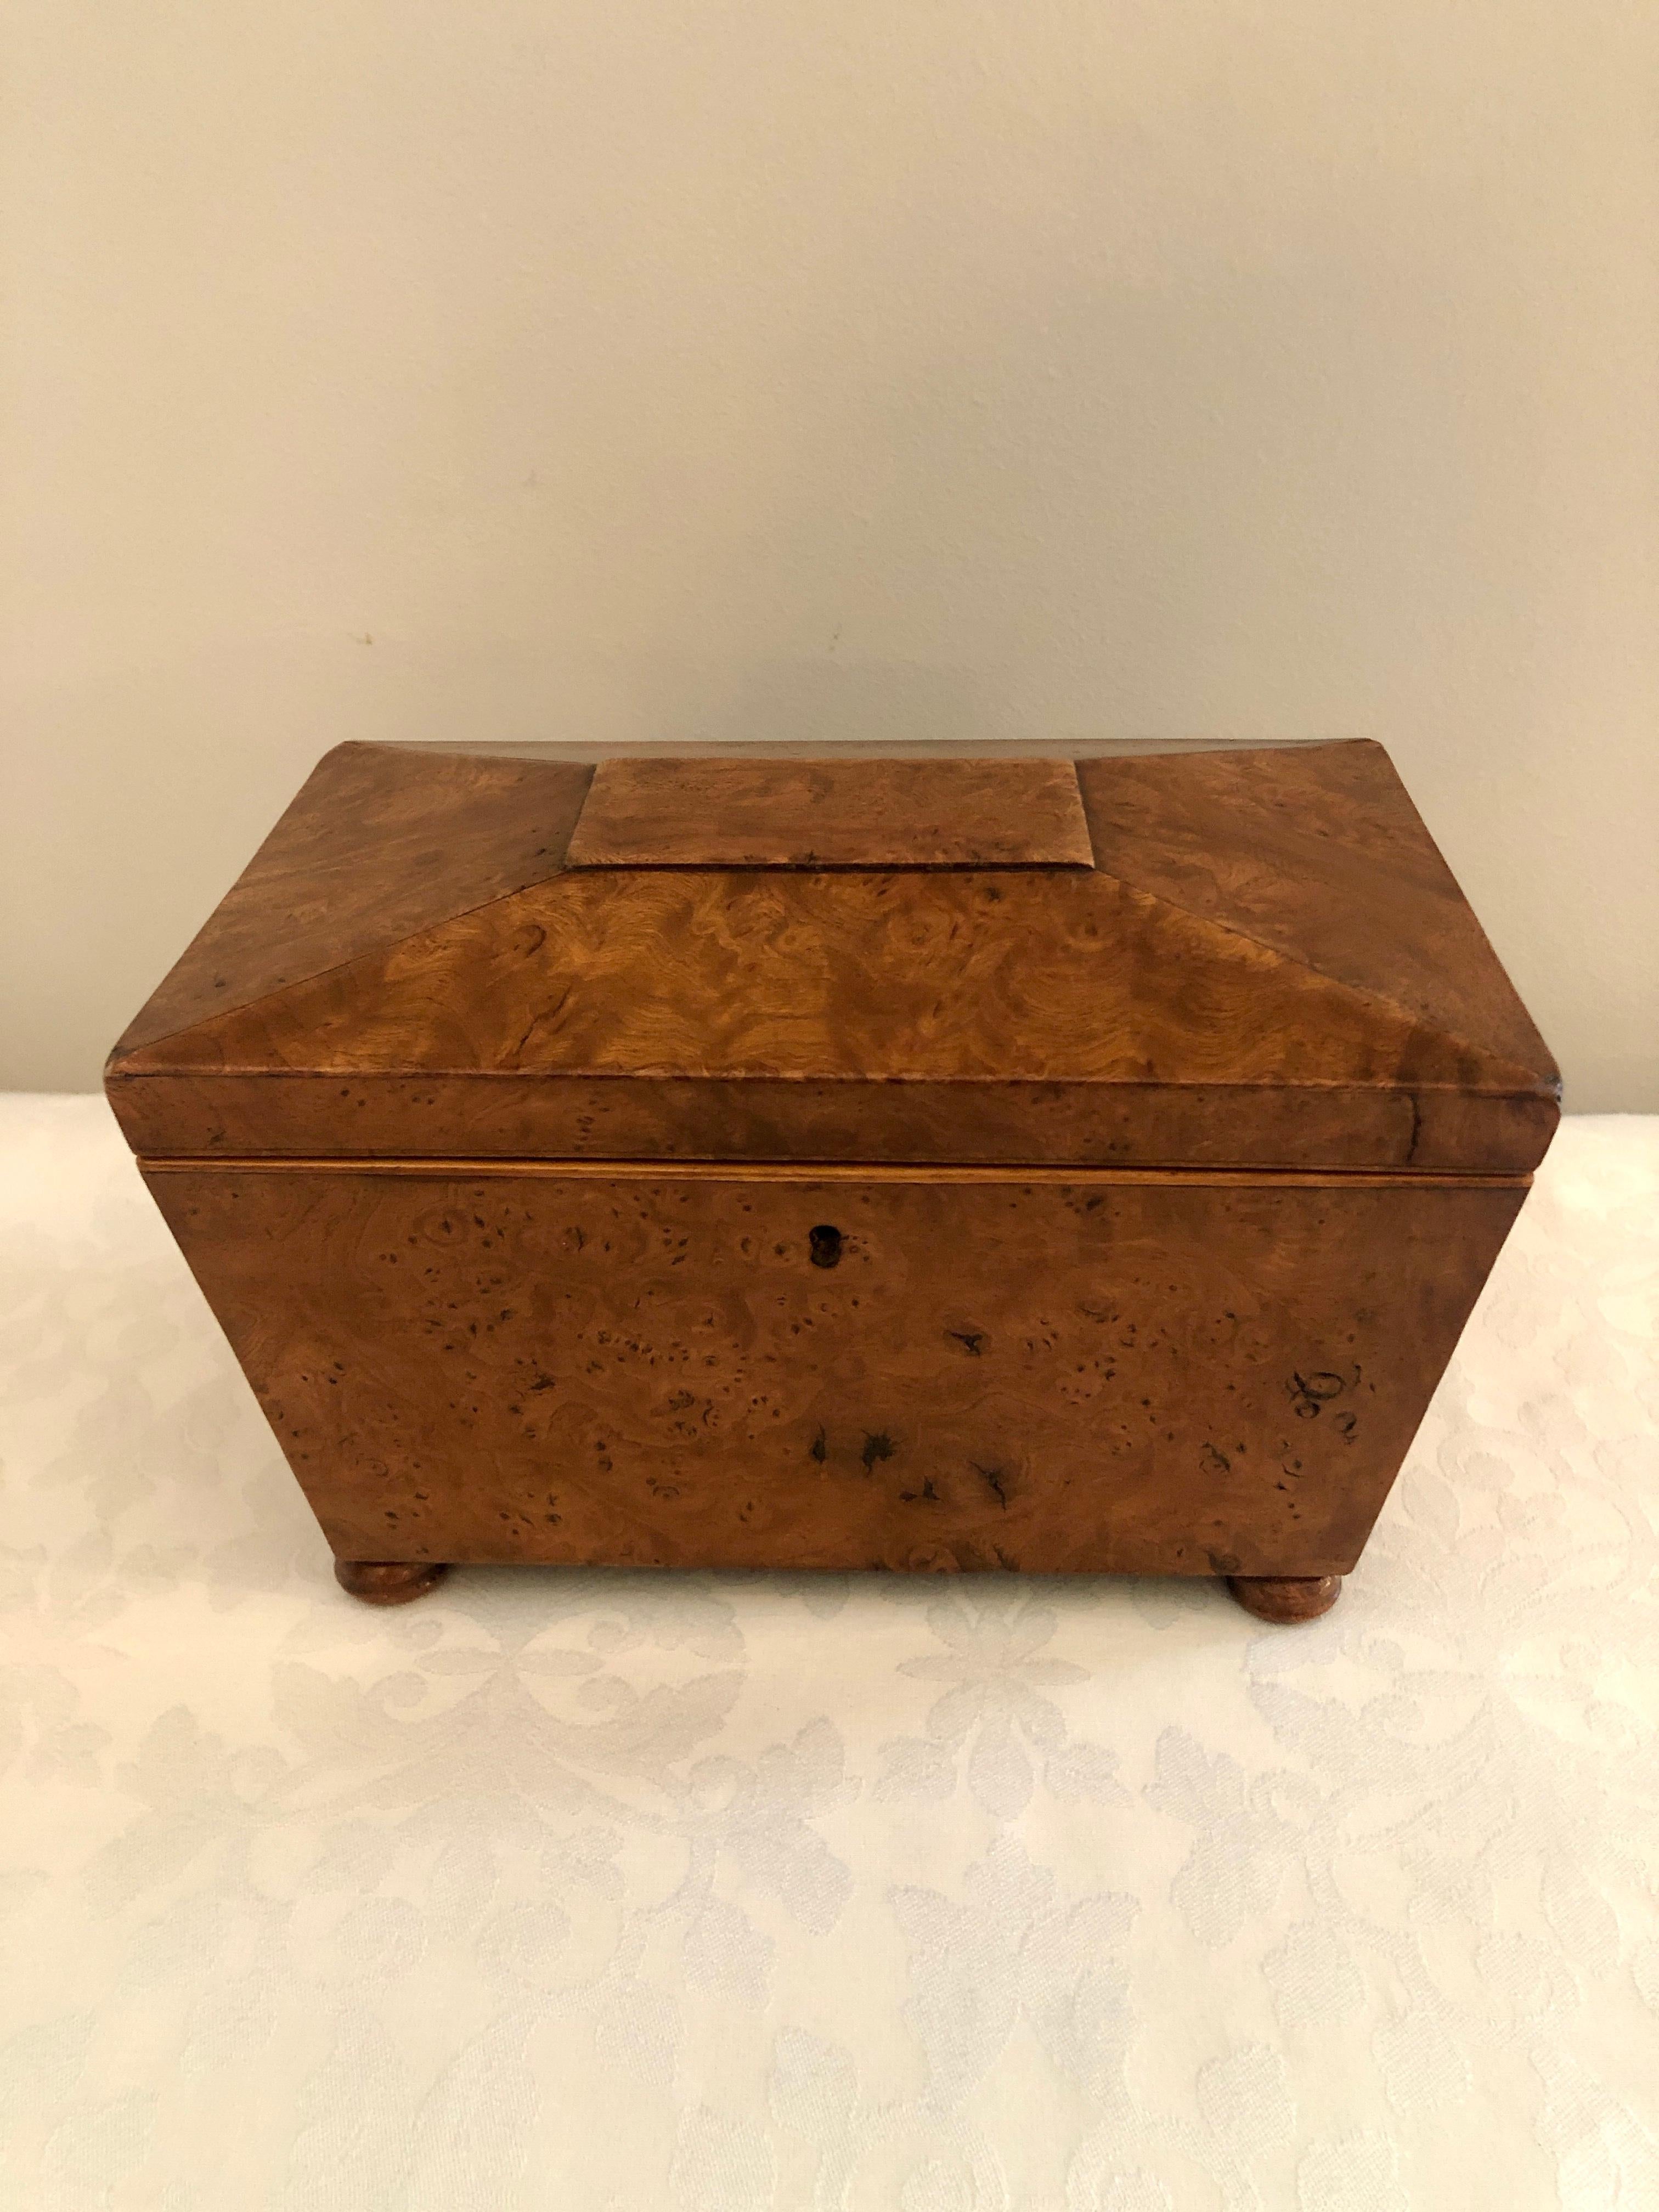 Regency antique 19th century burr elm tea caddy having a sarcophagus shaped lip which lifts to reveal two lidded compartments with original turned knobs, standing on small bun feet.

The color and patination are striking.

Measures: H 12.5cm
W